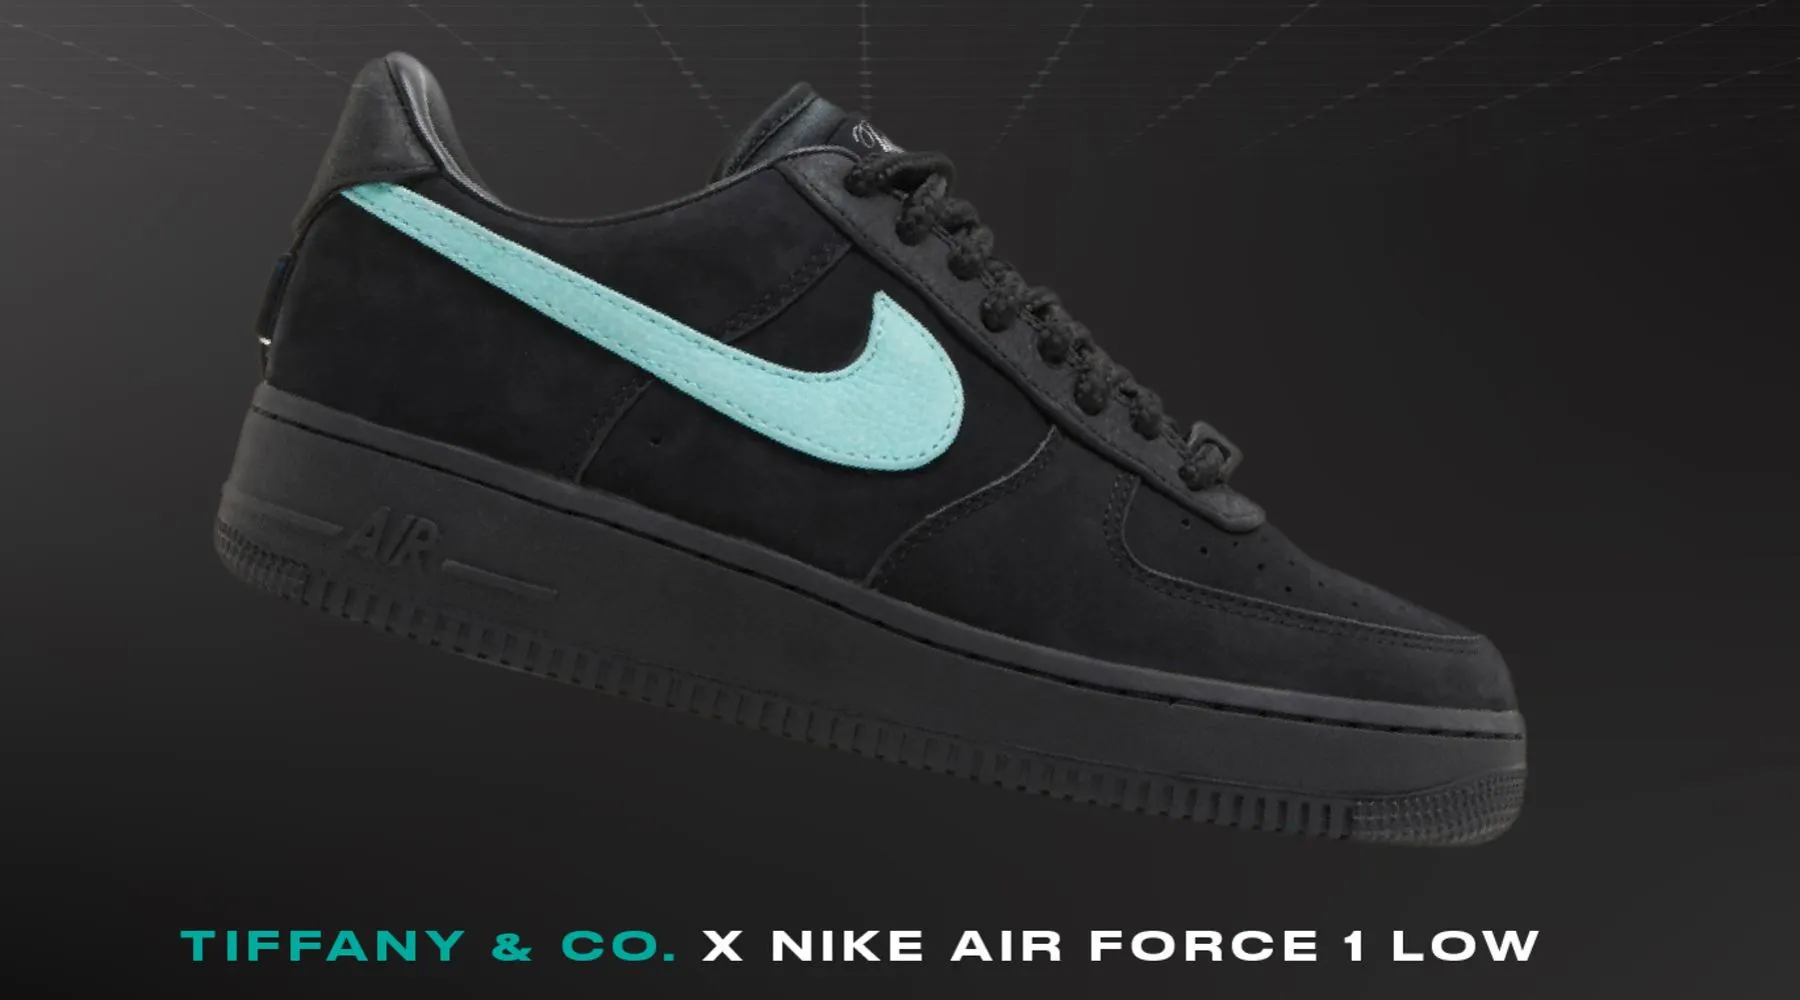 How to get the sold-out Tiffany x Nike AF1 1837 sneakers | Finder